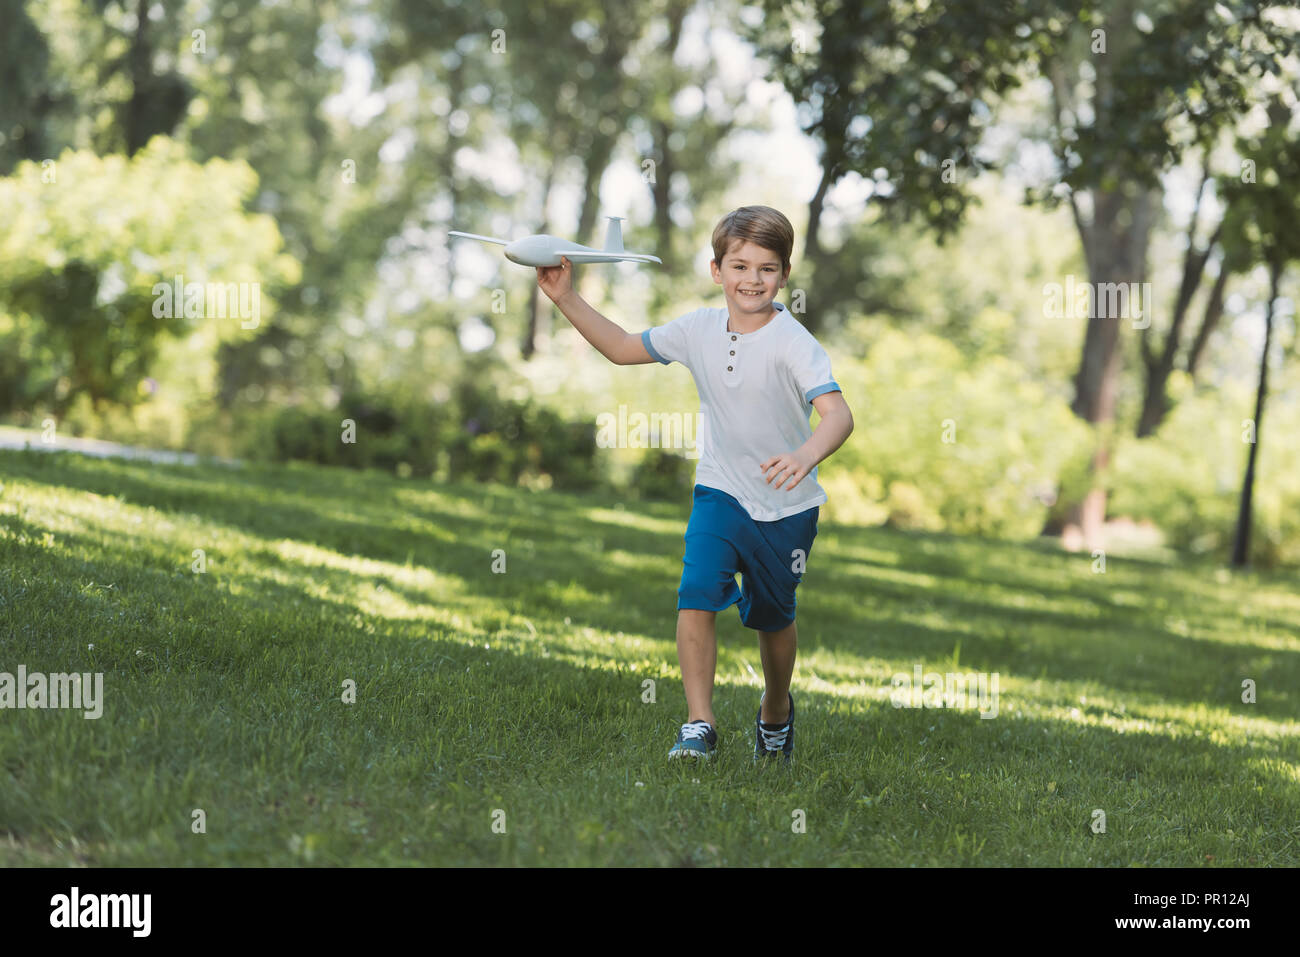 adorable happy boy holding toy plane and smiling at camera in park Stock Photo